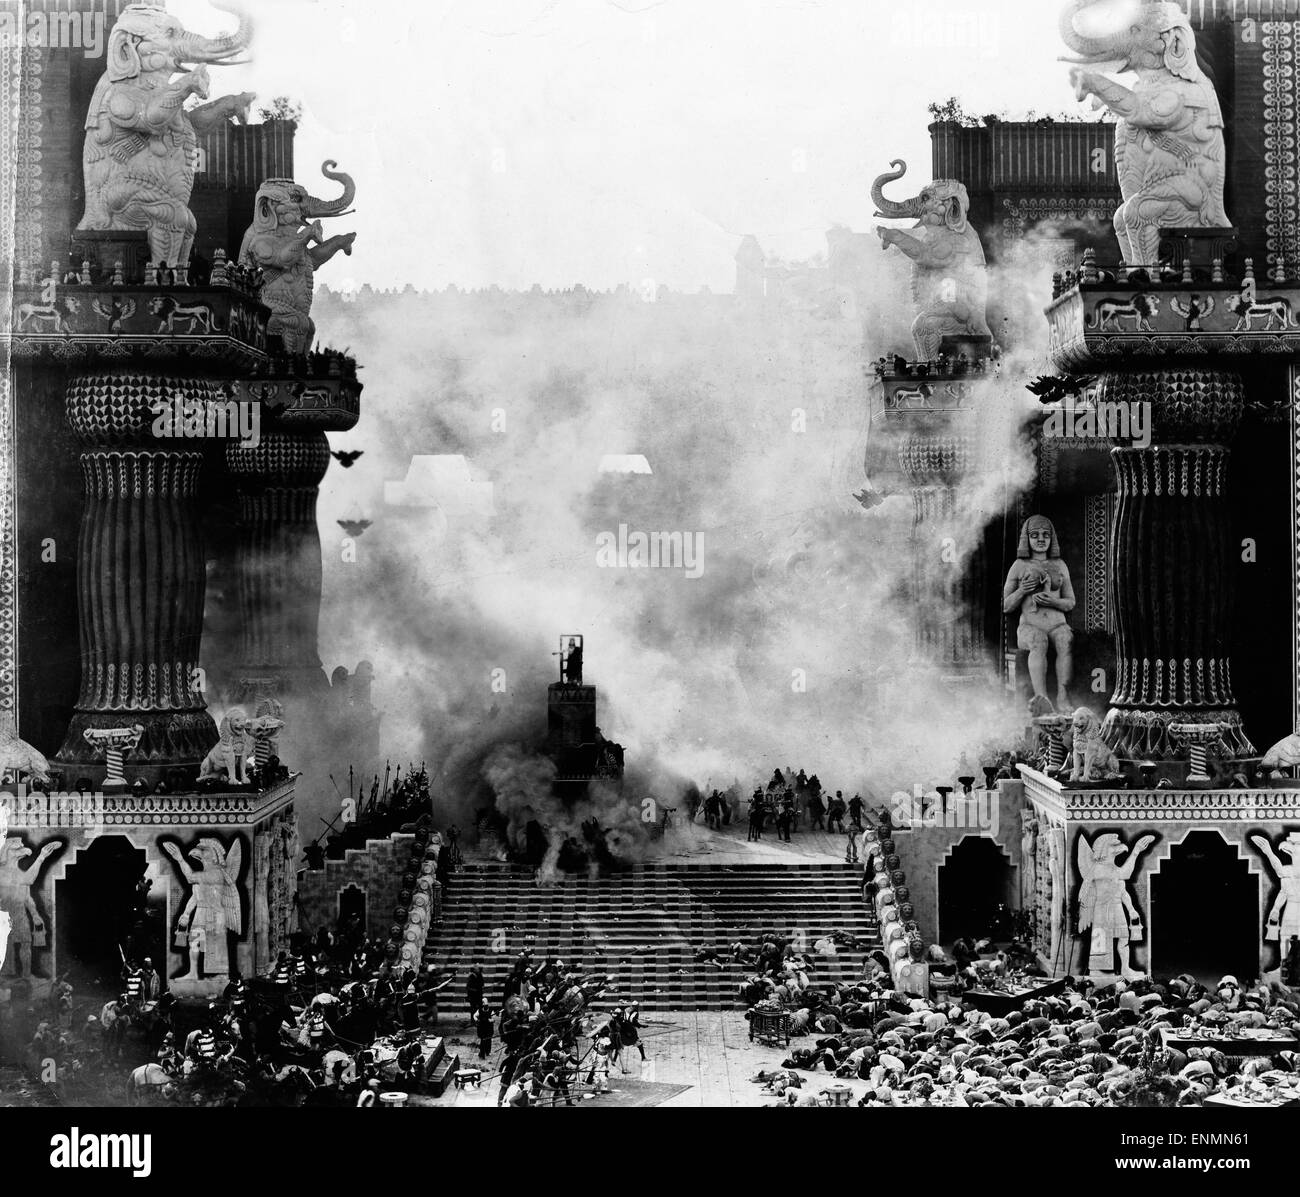 Intolerance 1916 High Resolution Stock Photography and Images - Alamy